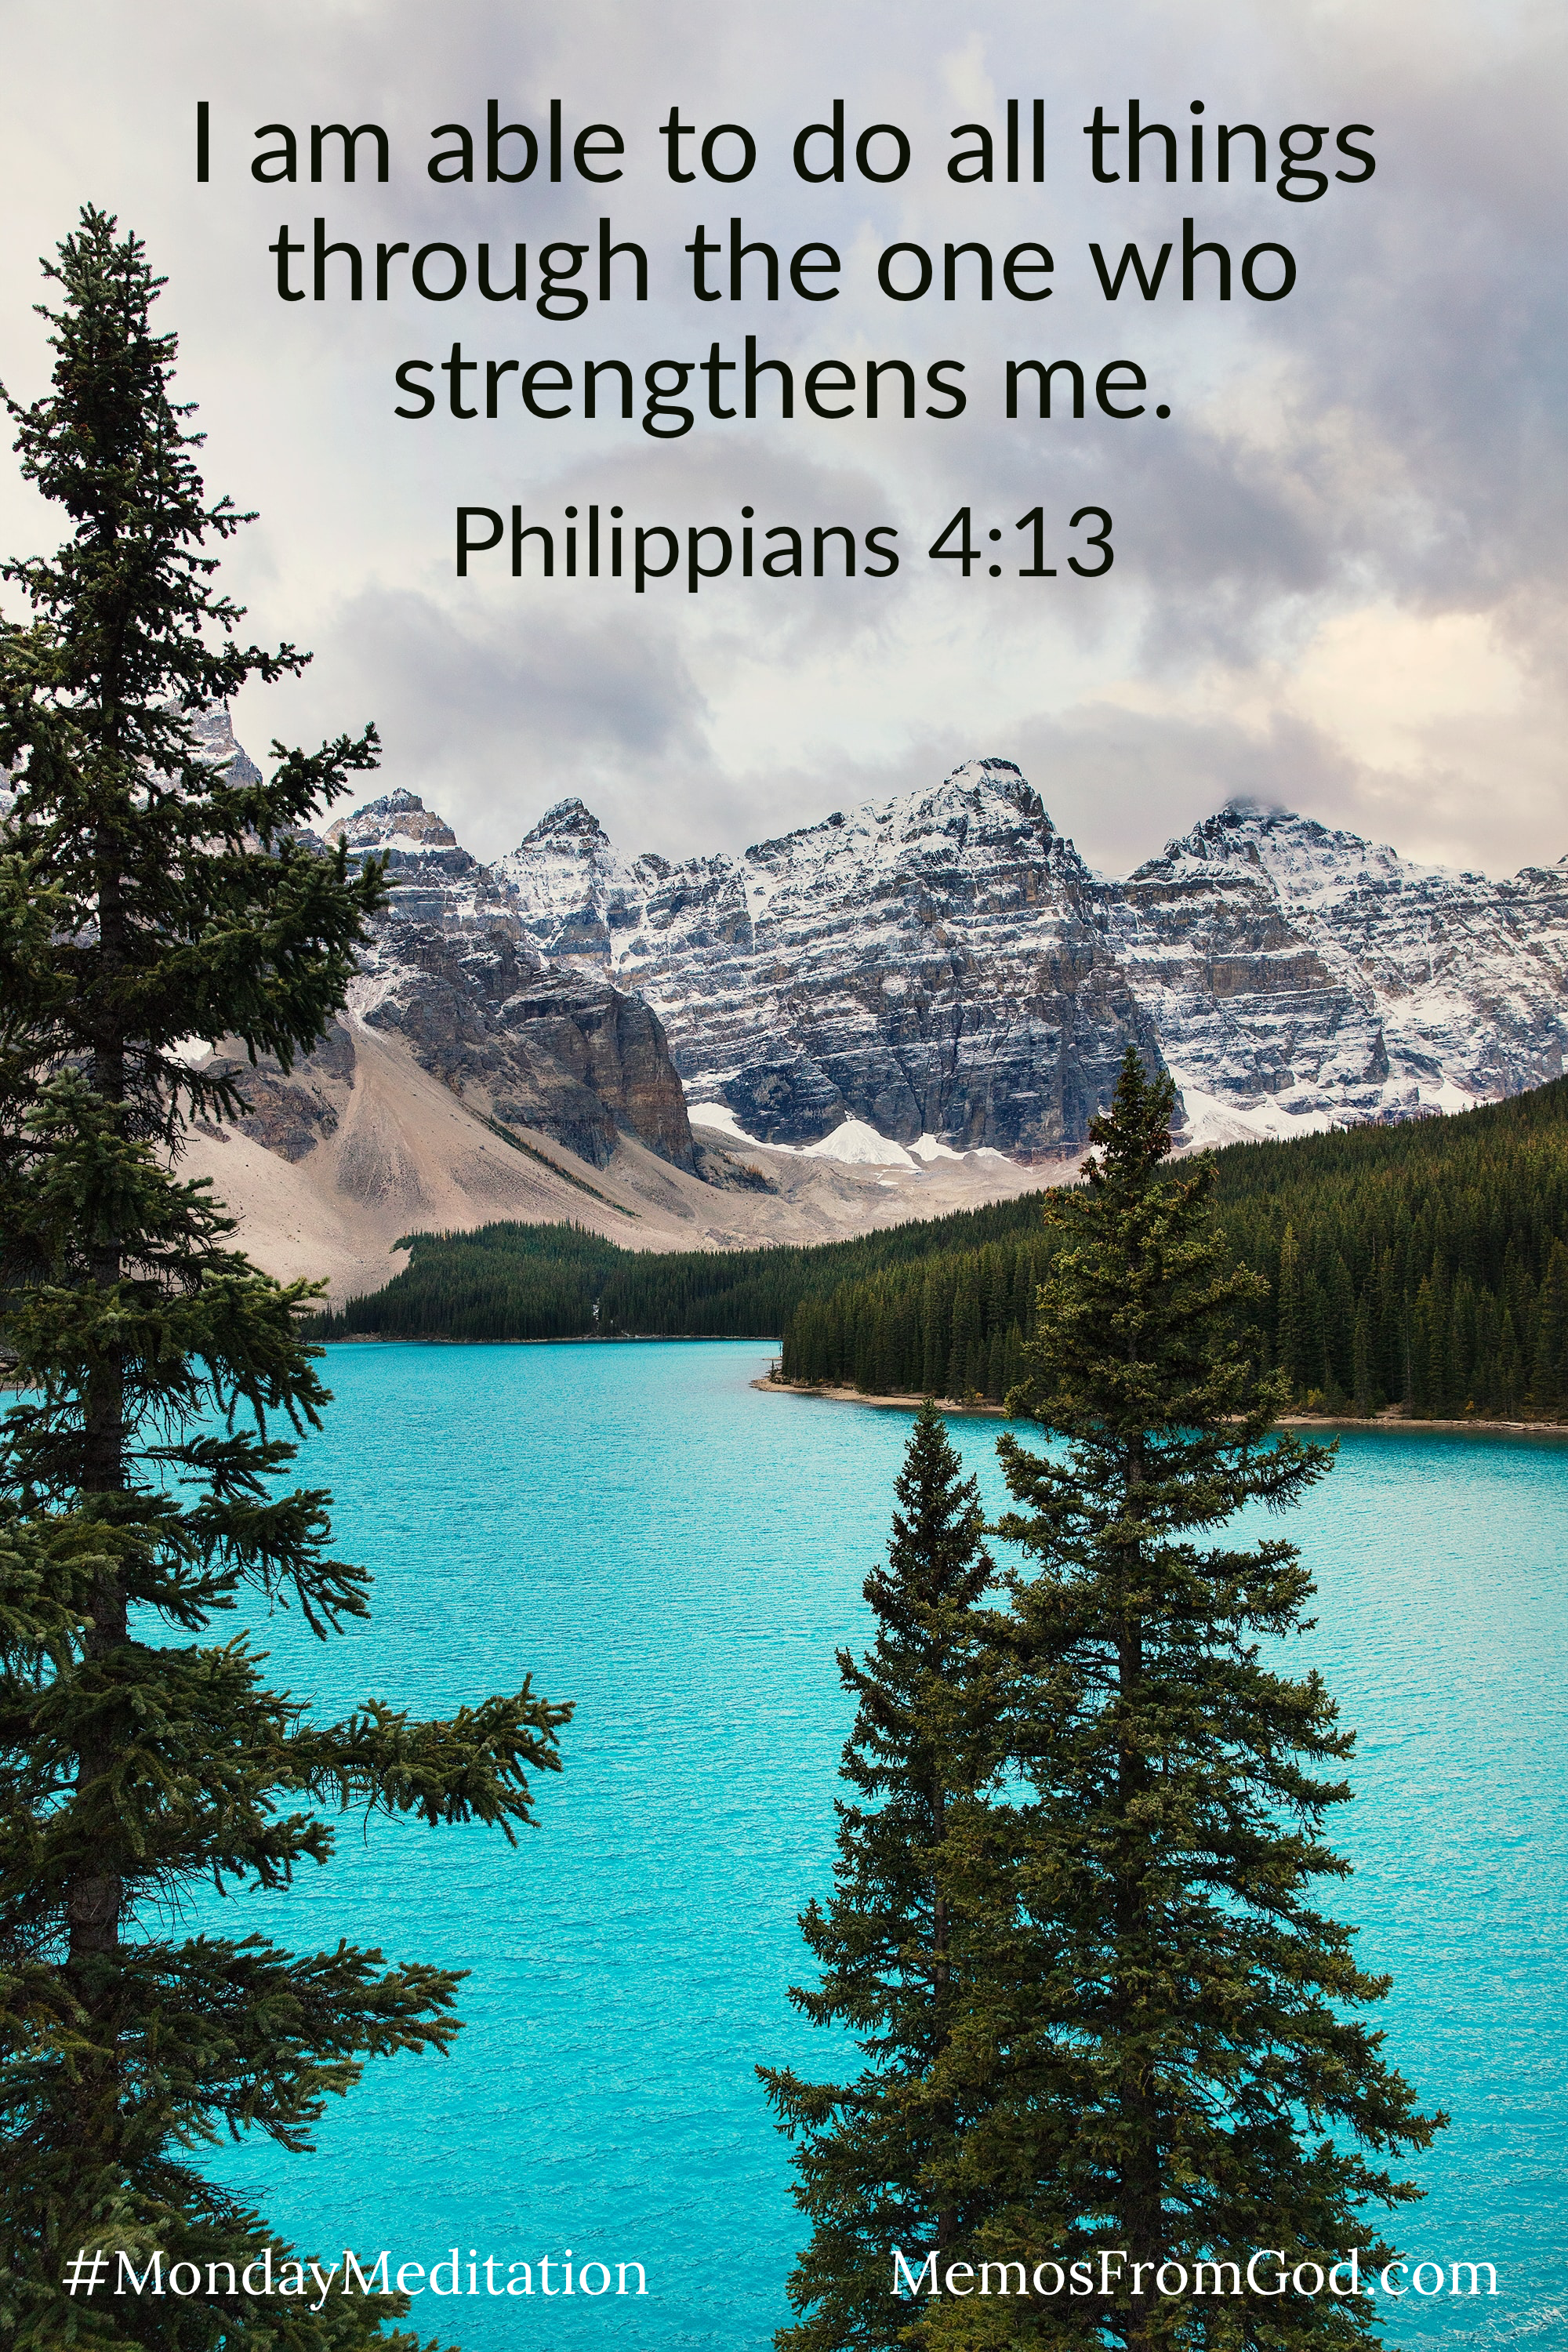 Two evergreen trees in the foreground of a turquoise lake with snowy mountains in the background. Caption: I am able to do all things through the one who strengthens me. Philippians 4:13